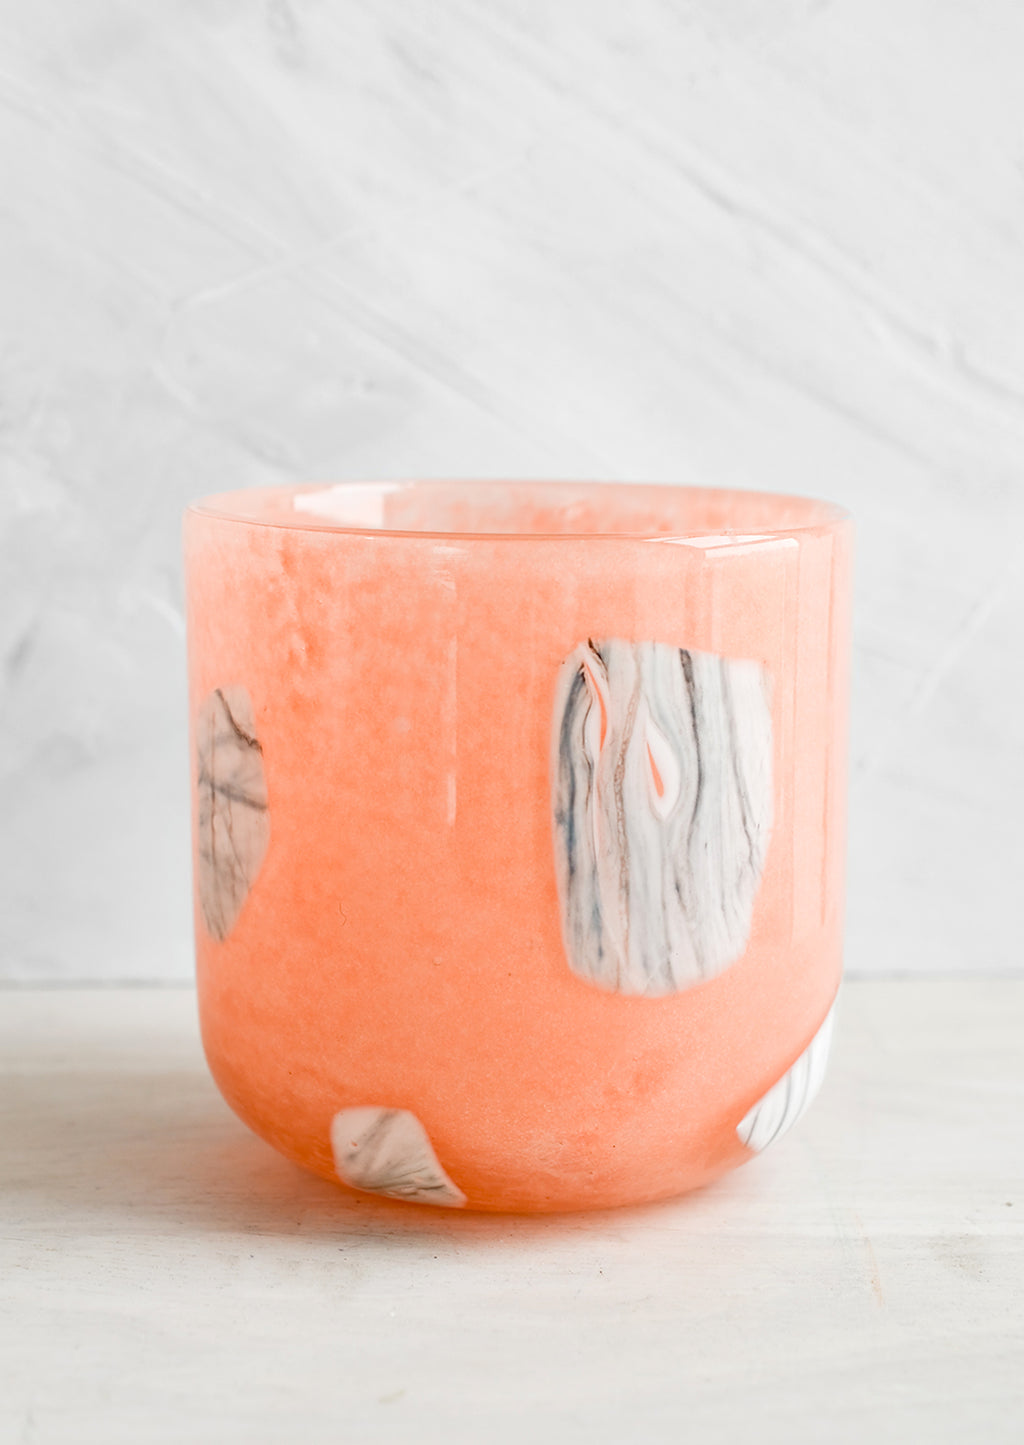 2: Peach glass cup with white and grey inlay pattern.